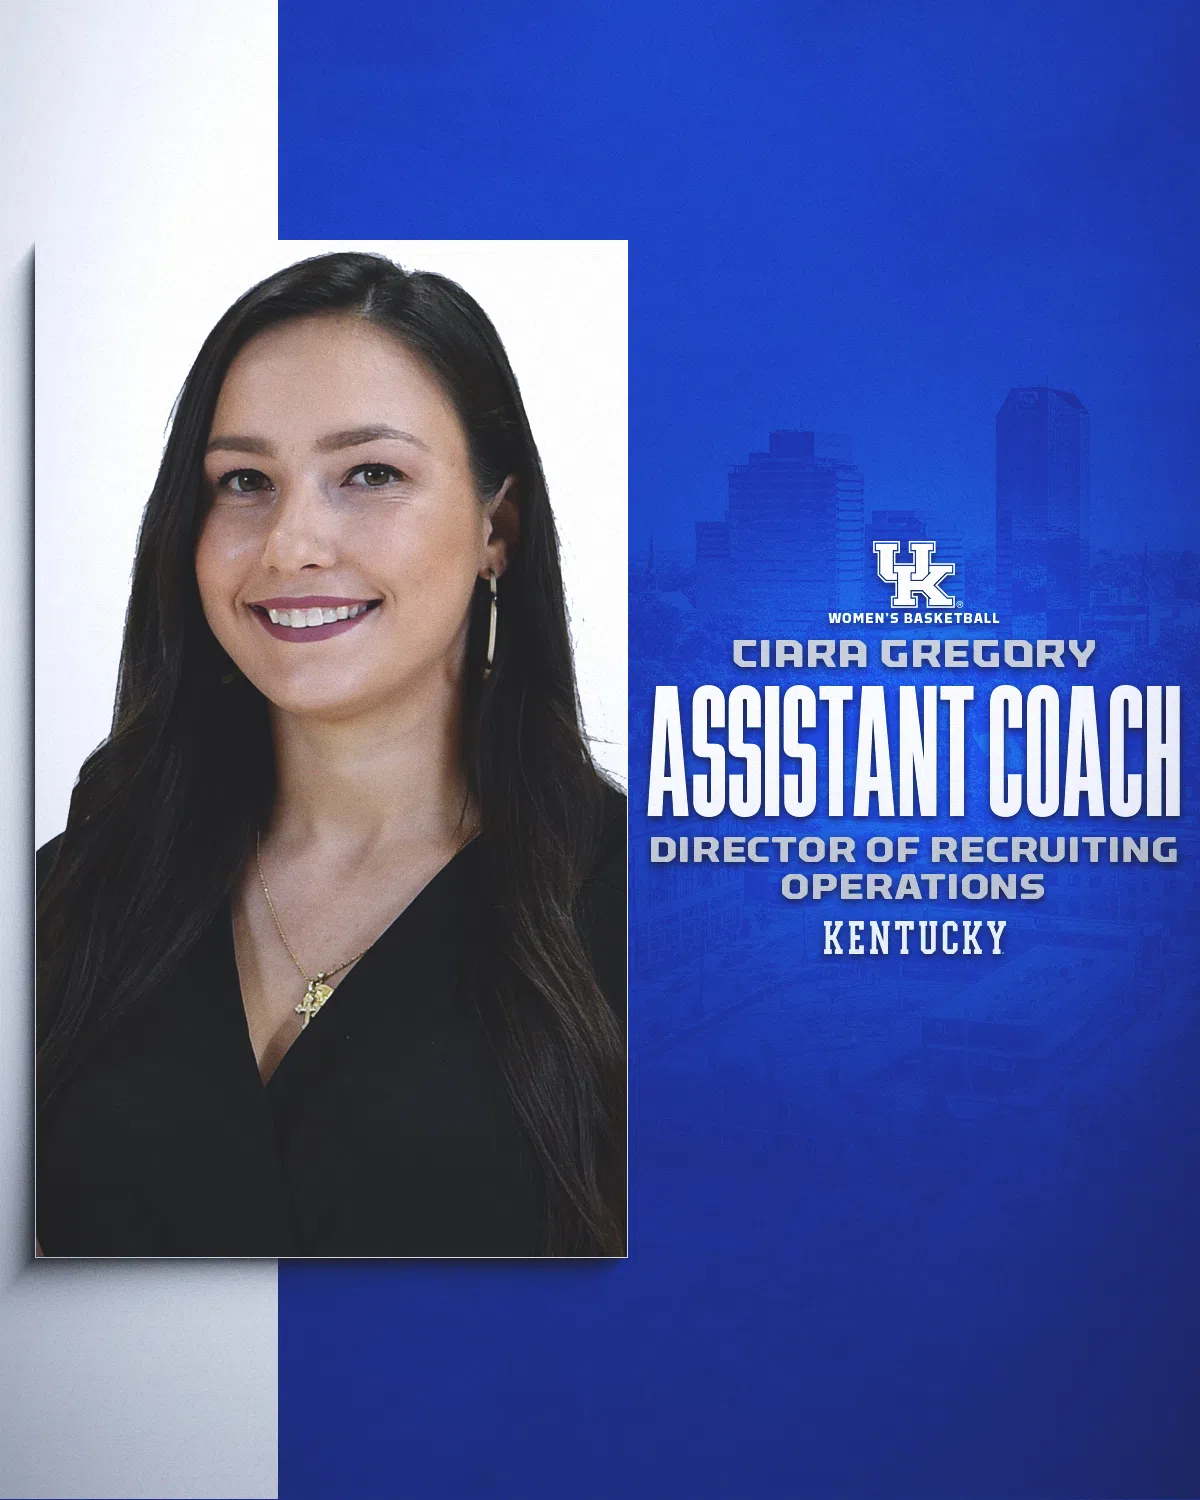 Kenny Brooks Has Hired Ciara Gregory as an Assistant Coach, Director of Recruiting Operations